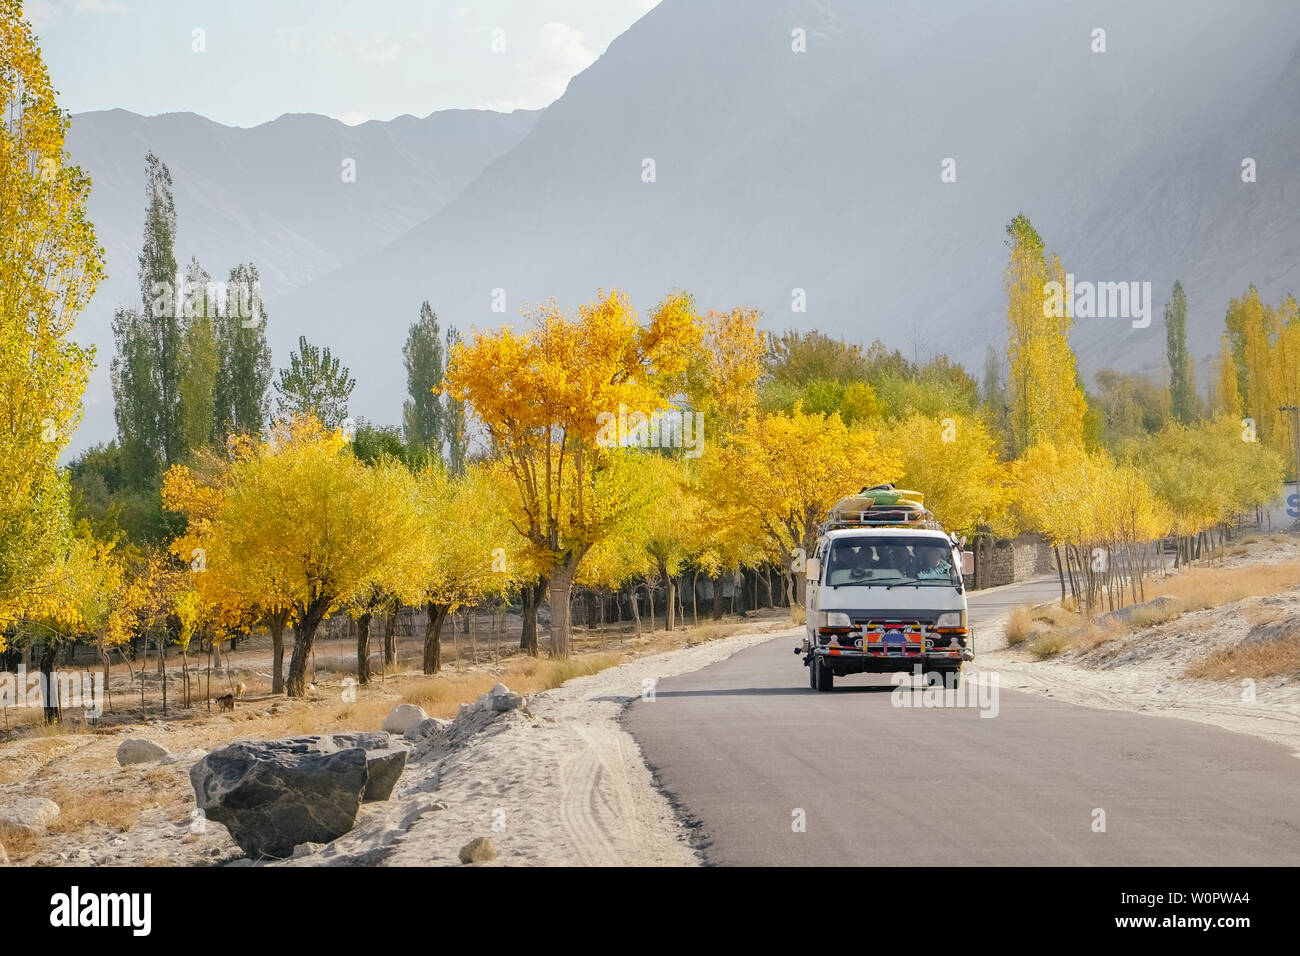 A local bus running on paved road with luggage bags on the roof with landscape view in autumn, Skardu. Gilgit Baltistan, Pakistan. Stock Photo